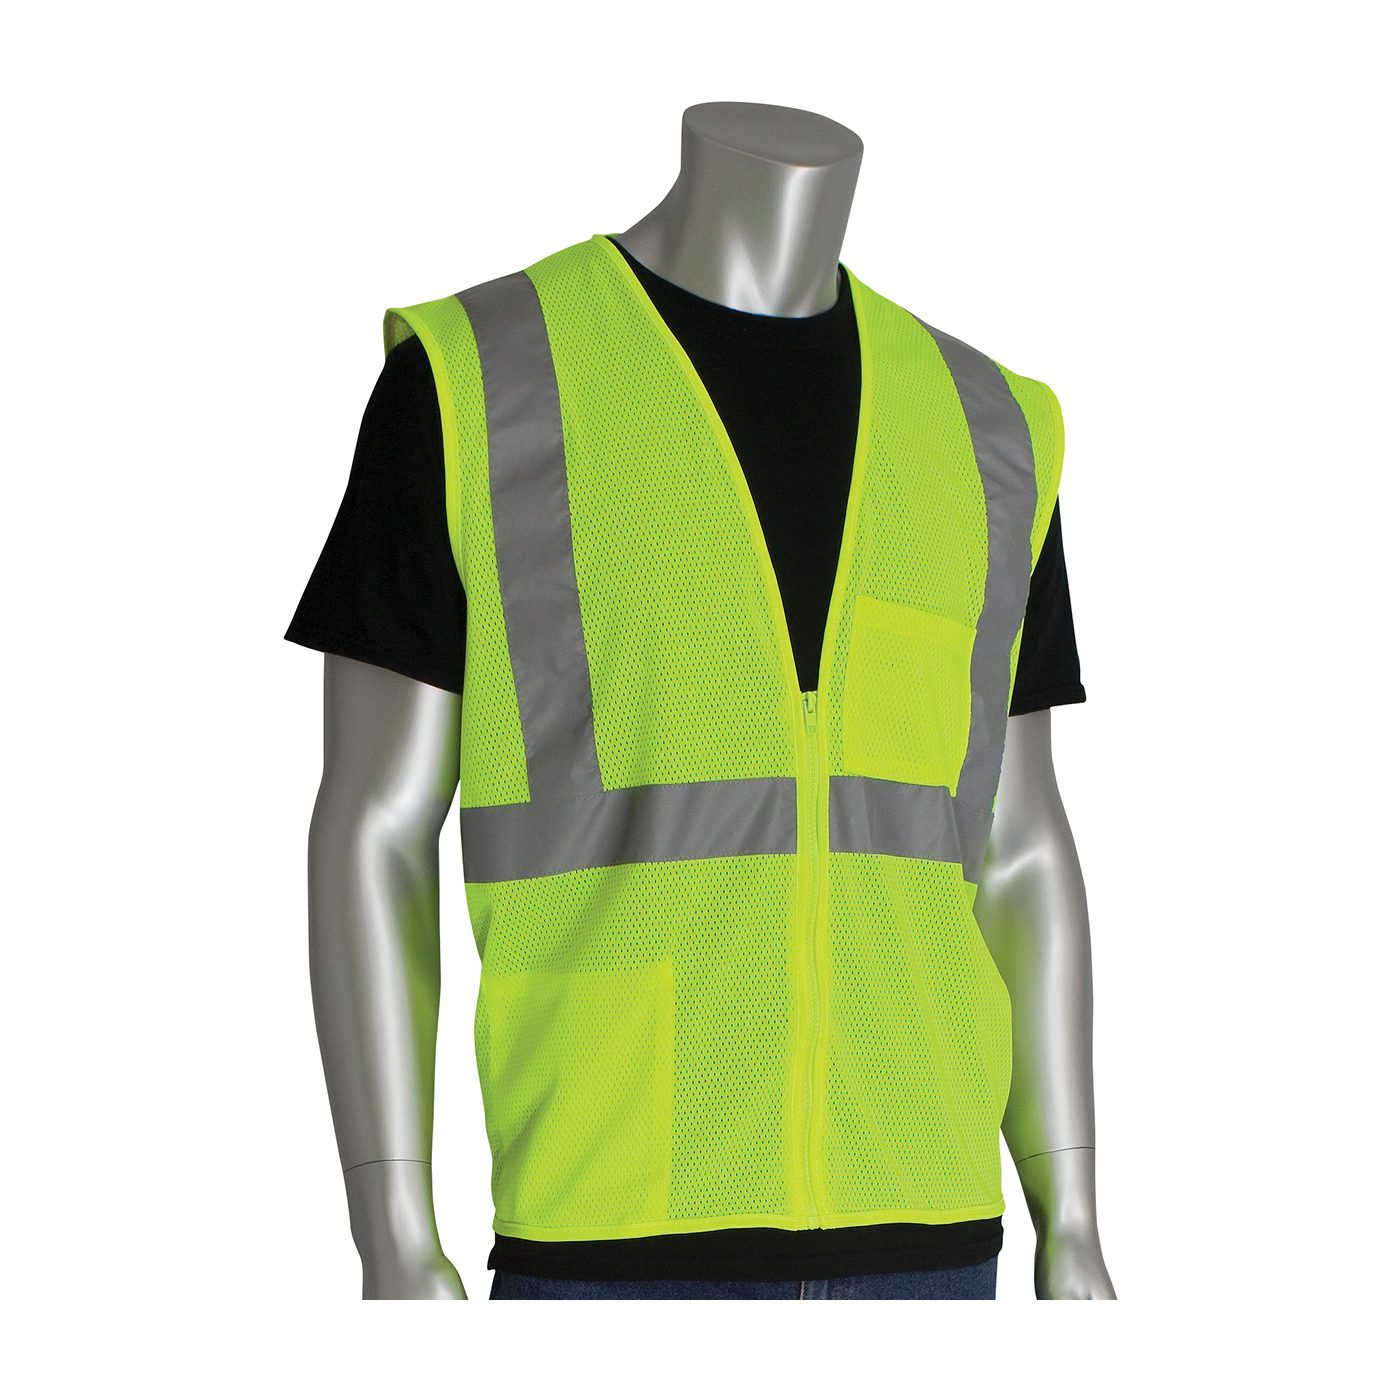 PIP® 302-0702Z Safety Vest, Hi-Viz Lime Yellow, Polyester Mesh, Zipper Closure, 2 Pockets, ANSI Class: Class 2, Specifications Met: ANSI 107 Type R